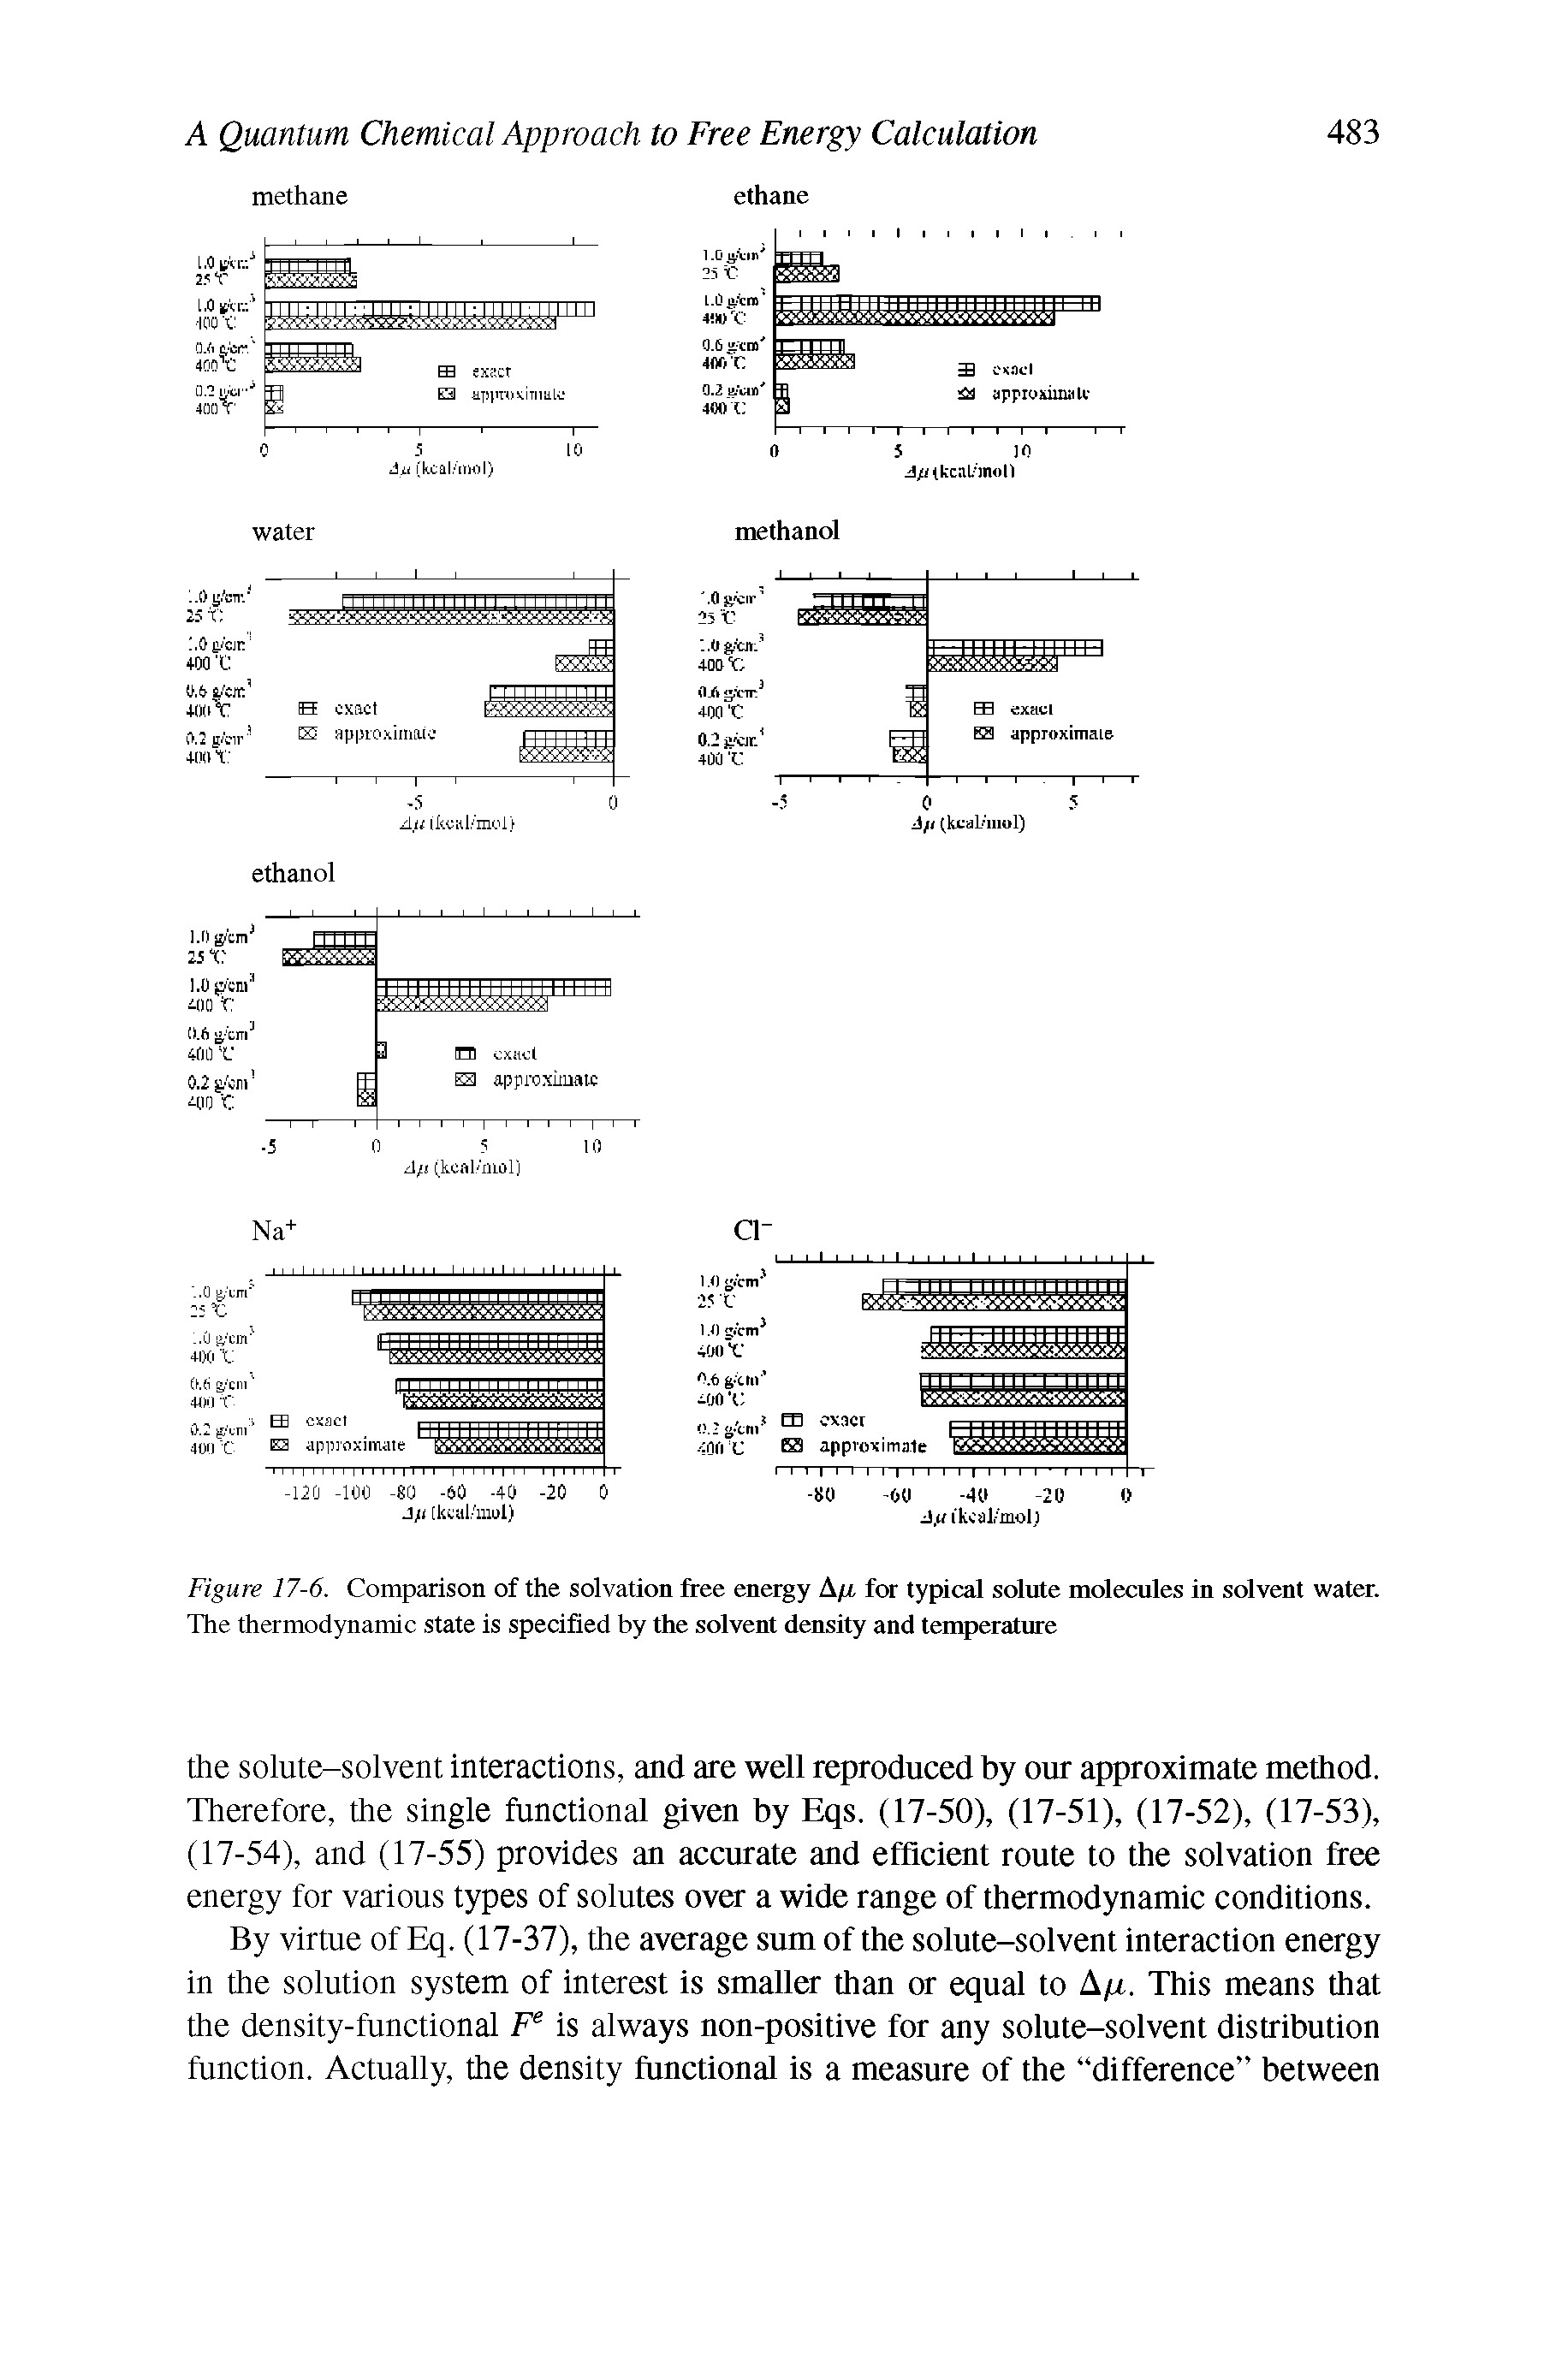 Figure 17-6. Comparison of the solvation free energy A//, for typical solute molecules in solvent water. The thermodynamic state is specified by the solvent density and temperature...